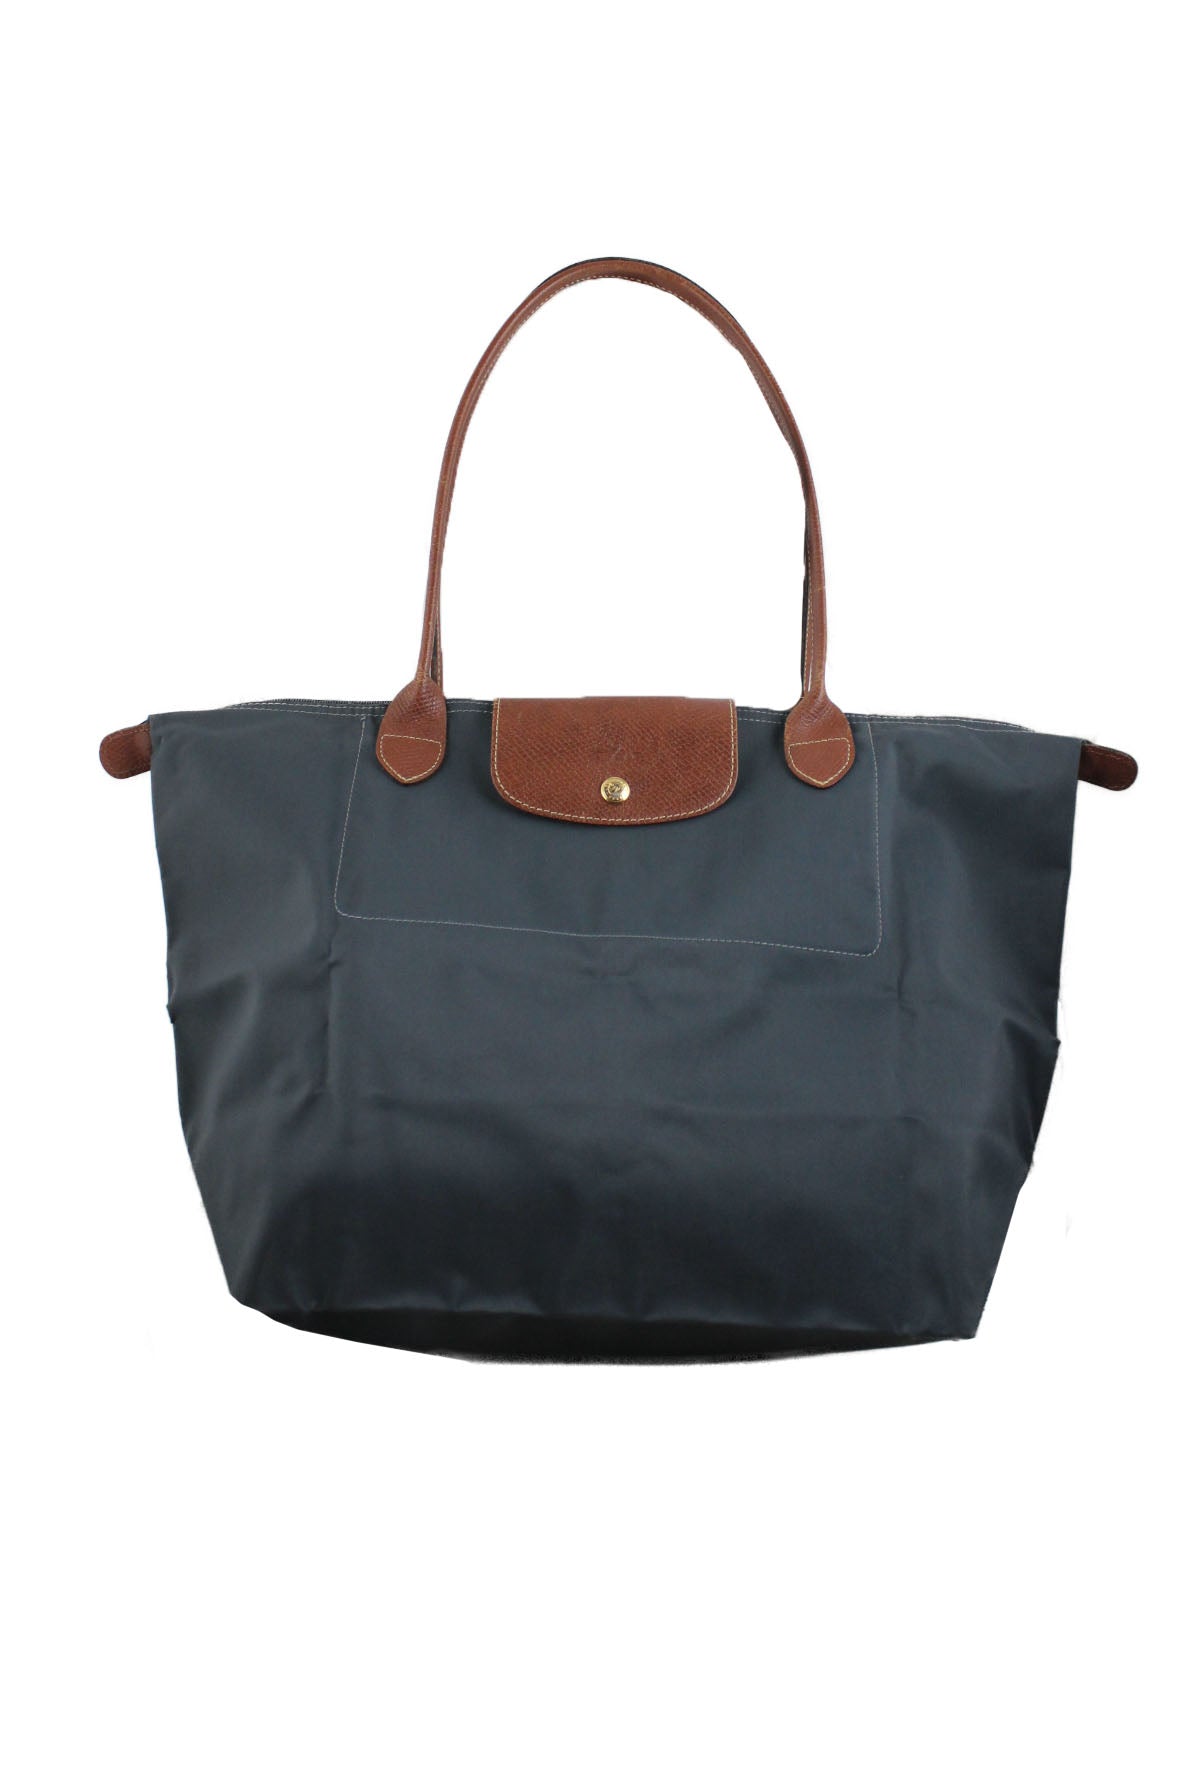 front of longchamp grey medium size foldable nylon shoulder tote. featuring brown tone leather top handles and flap closure. top zippered closure with branded zipper pull. 